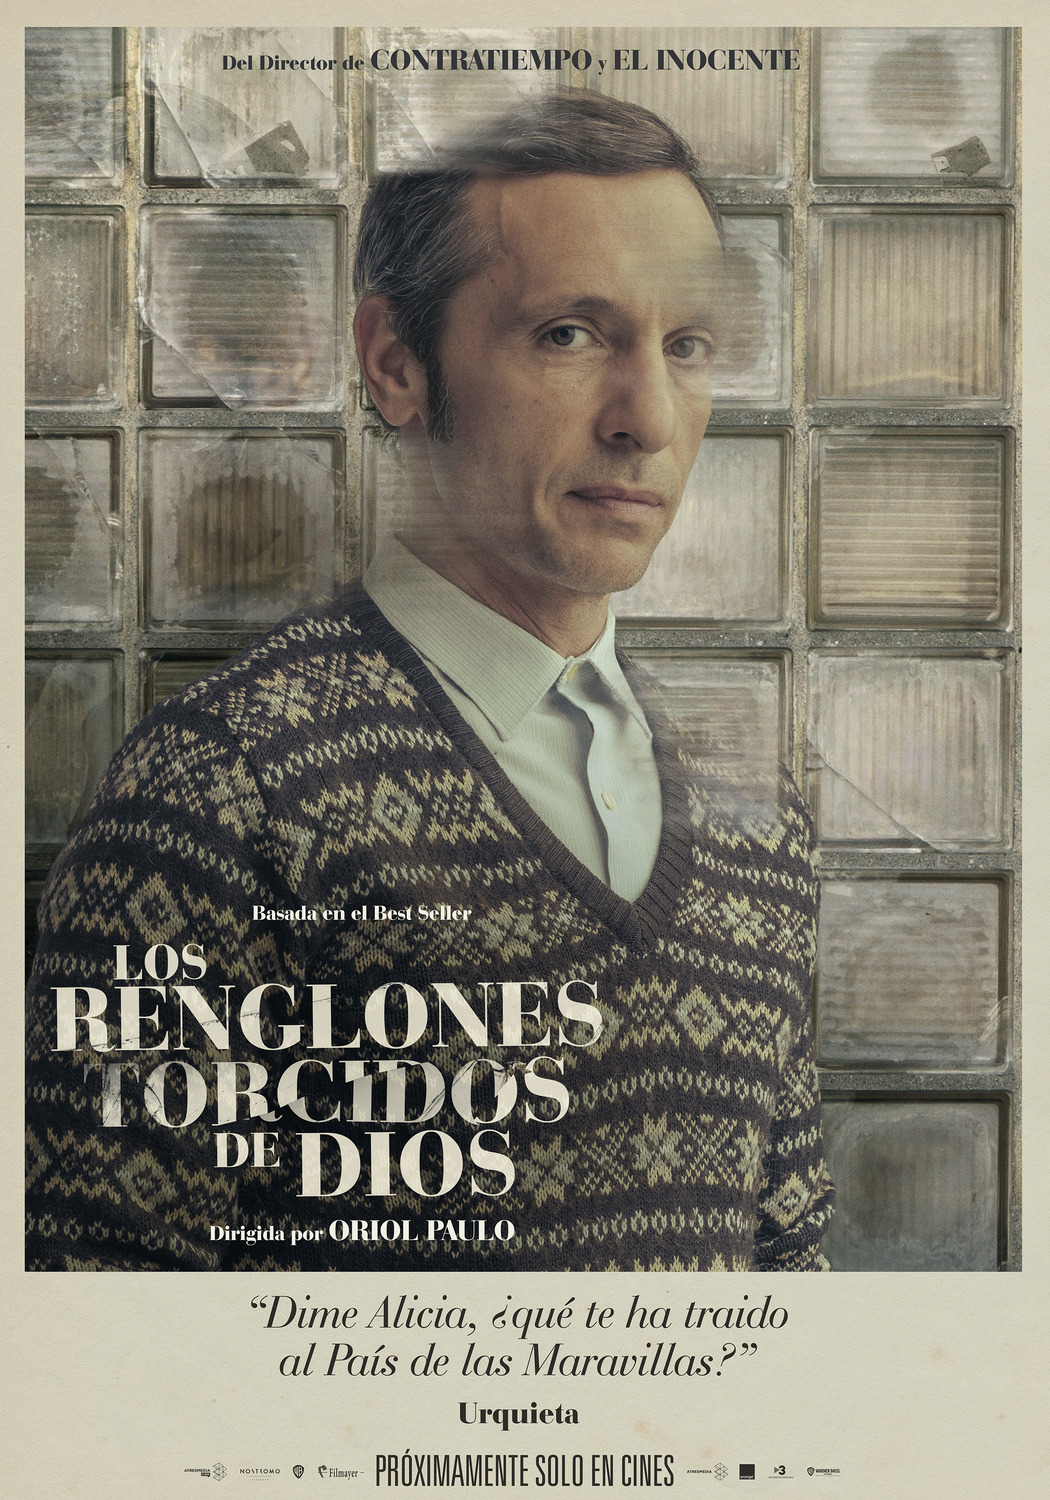 Extra Large Movie Poster Image for Los renglones torcidos de Dios (#9 of 11)